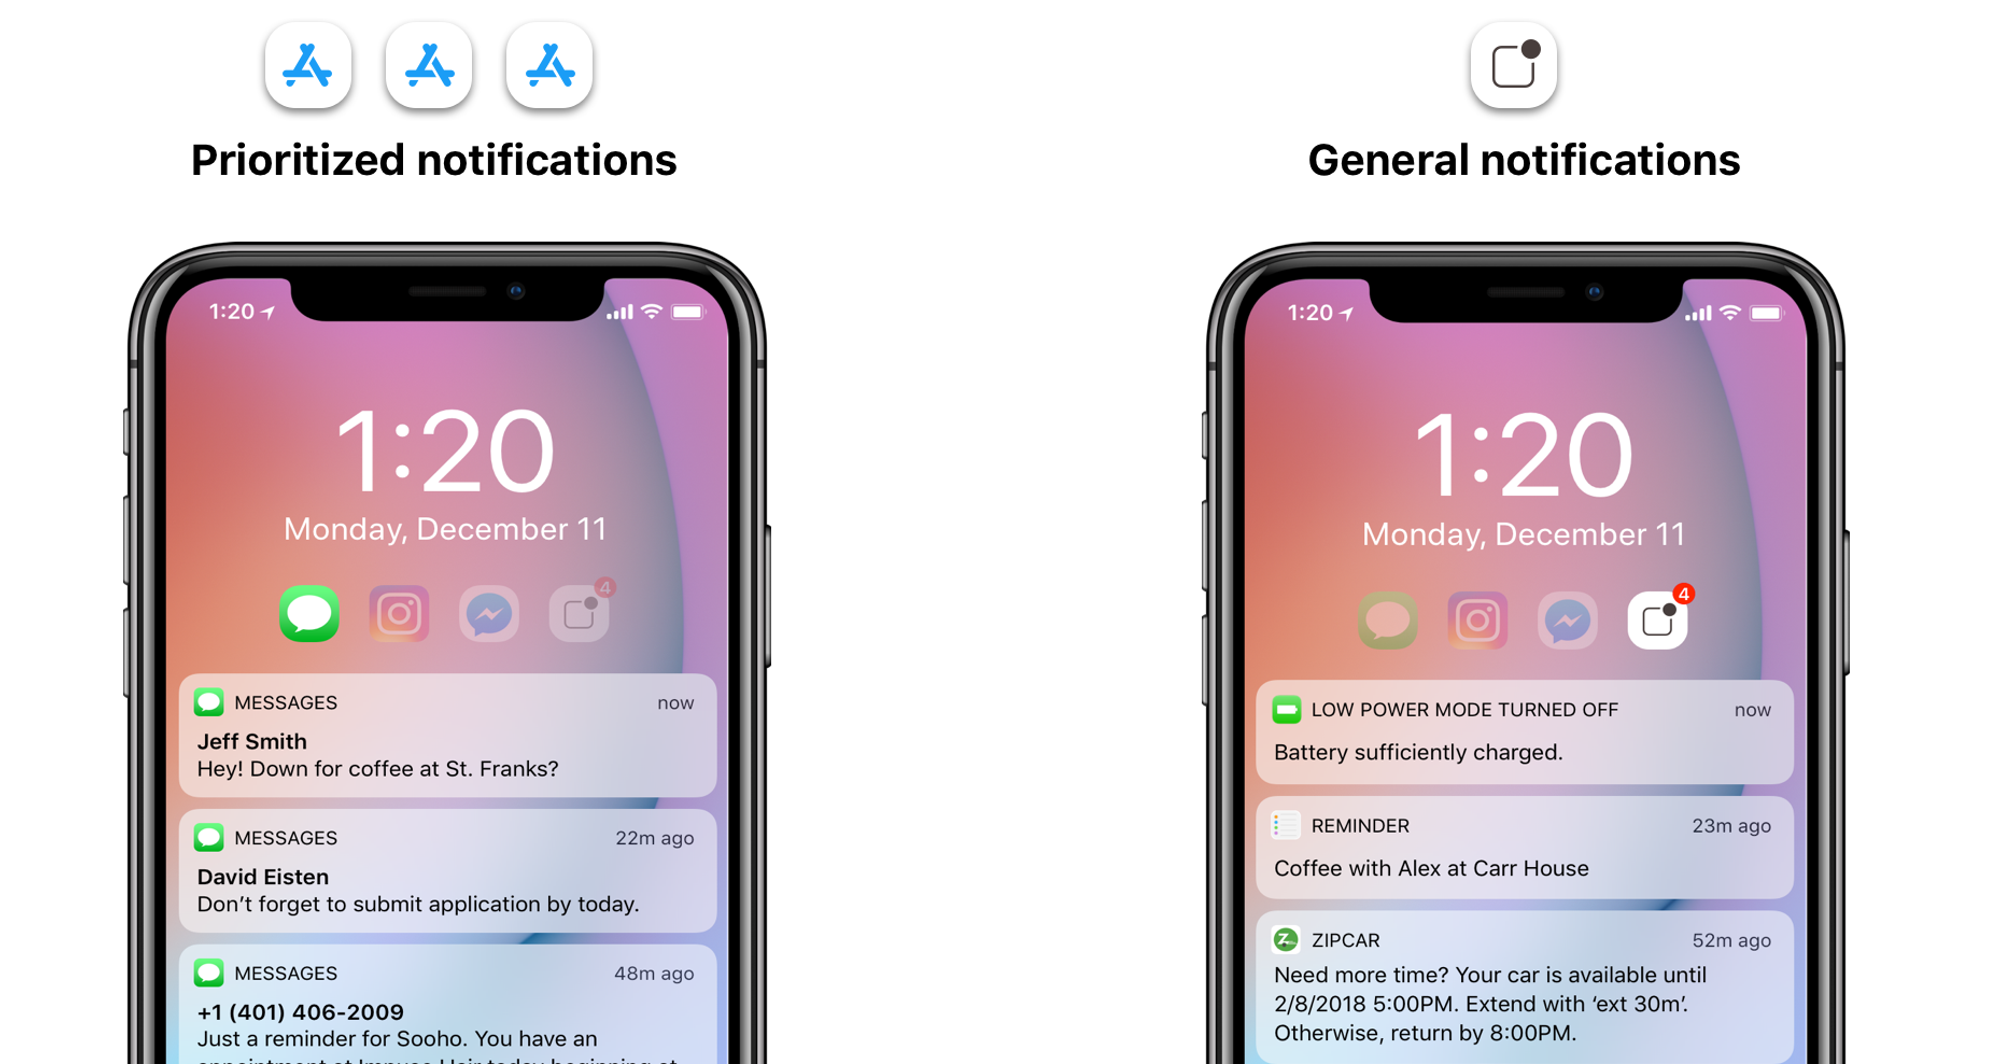 iOS Notification redesign concept - a UX case study